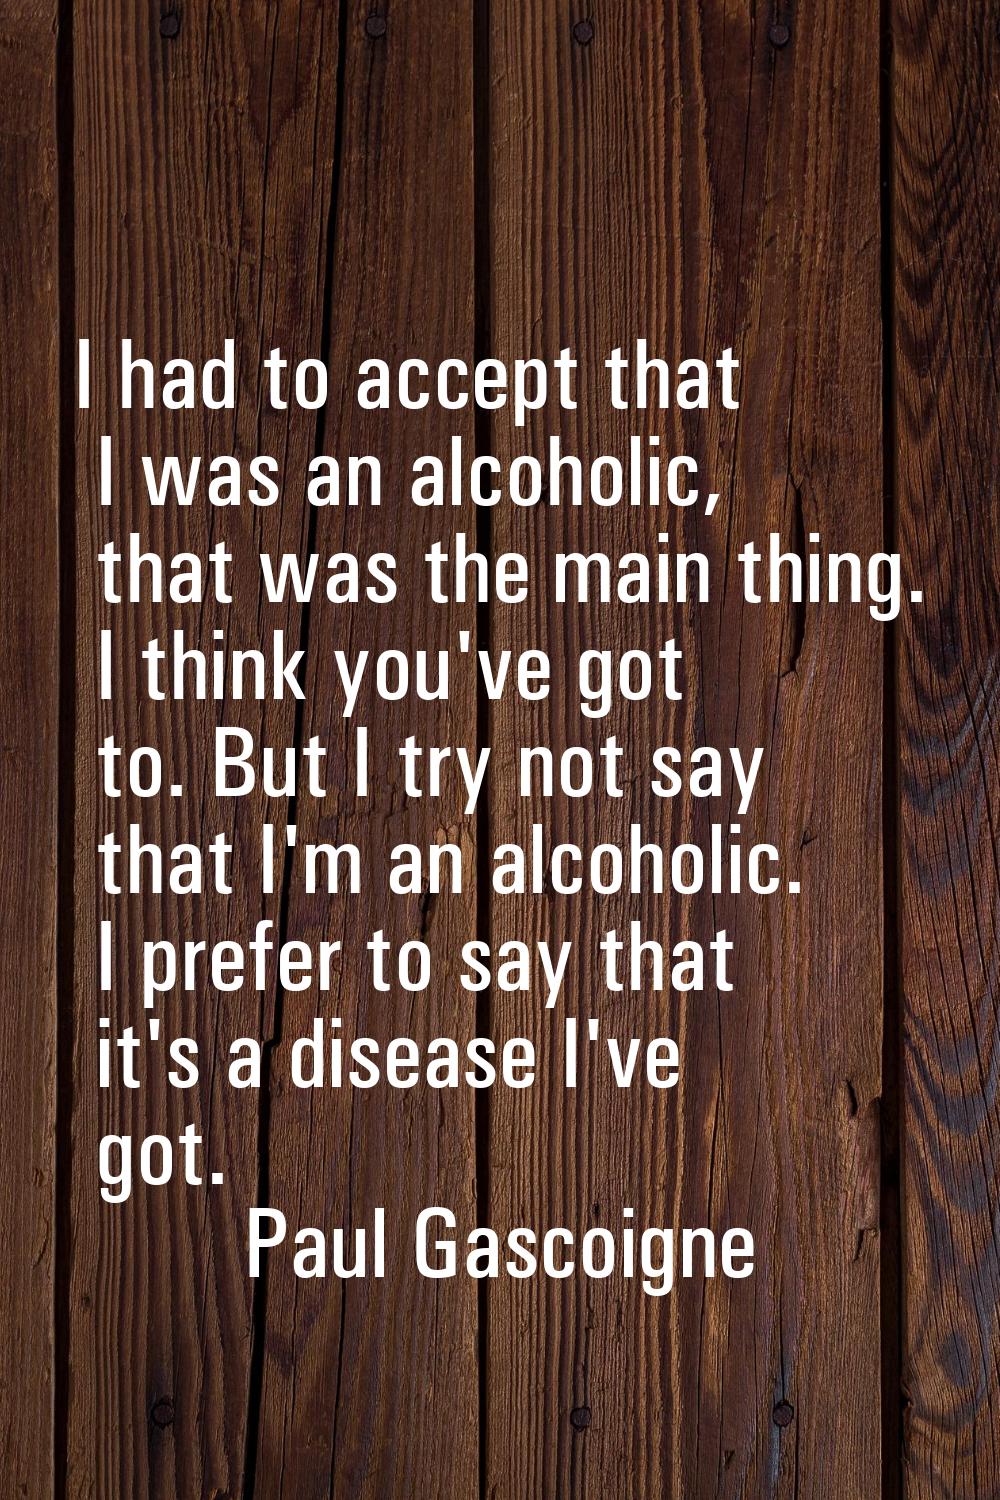 I had to accept that I was an alcoholic, that was the main thing. I think you've got to. But I try 